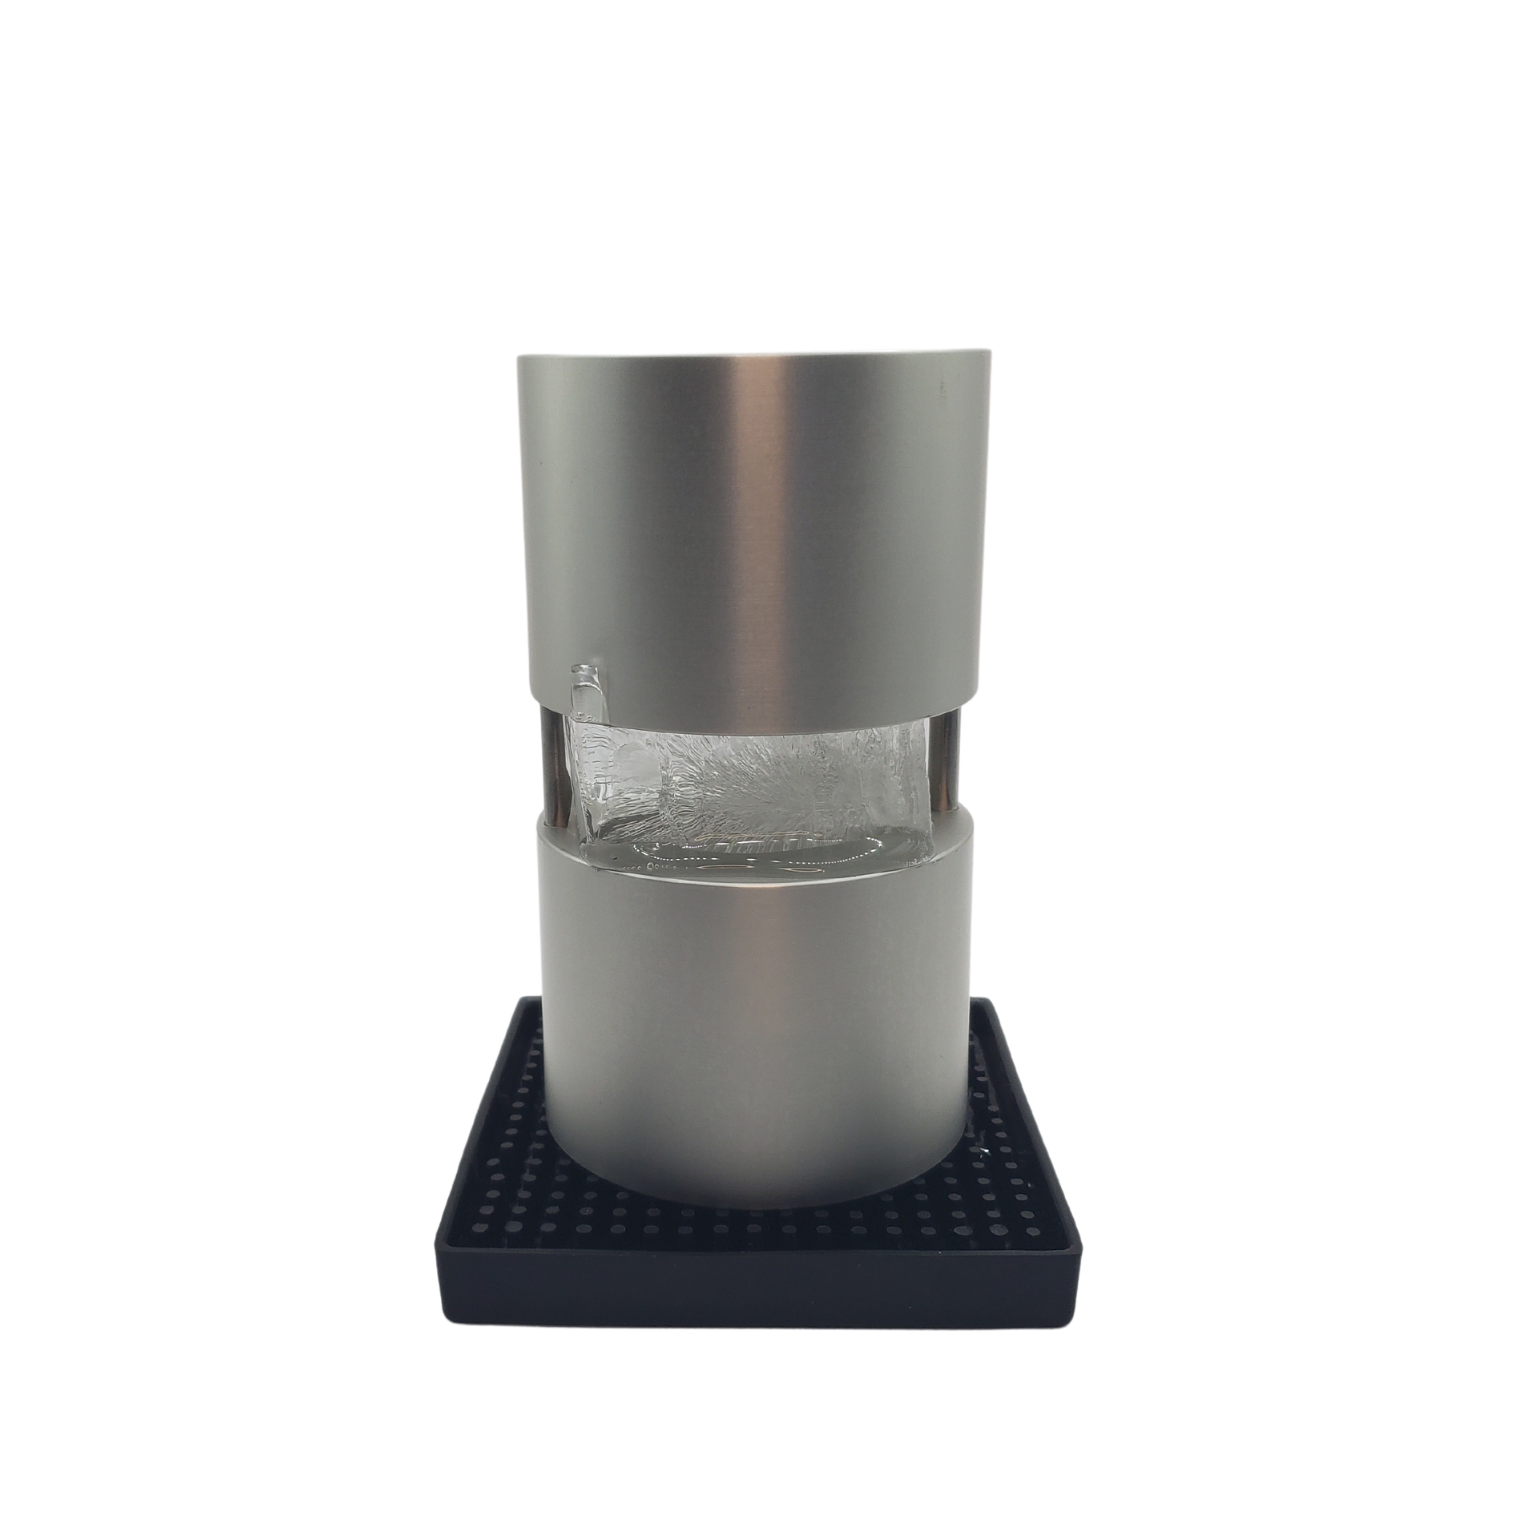 Bourbon Lovers Rejoice: Forge Sphere Ice Press Debuts at CES 2019